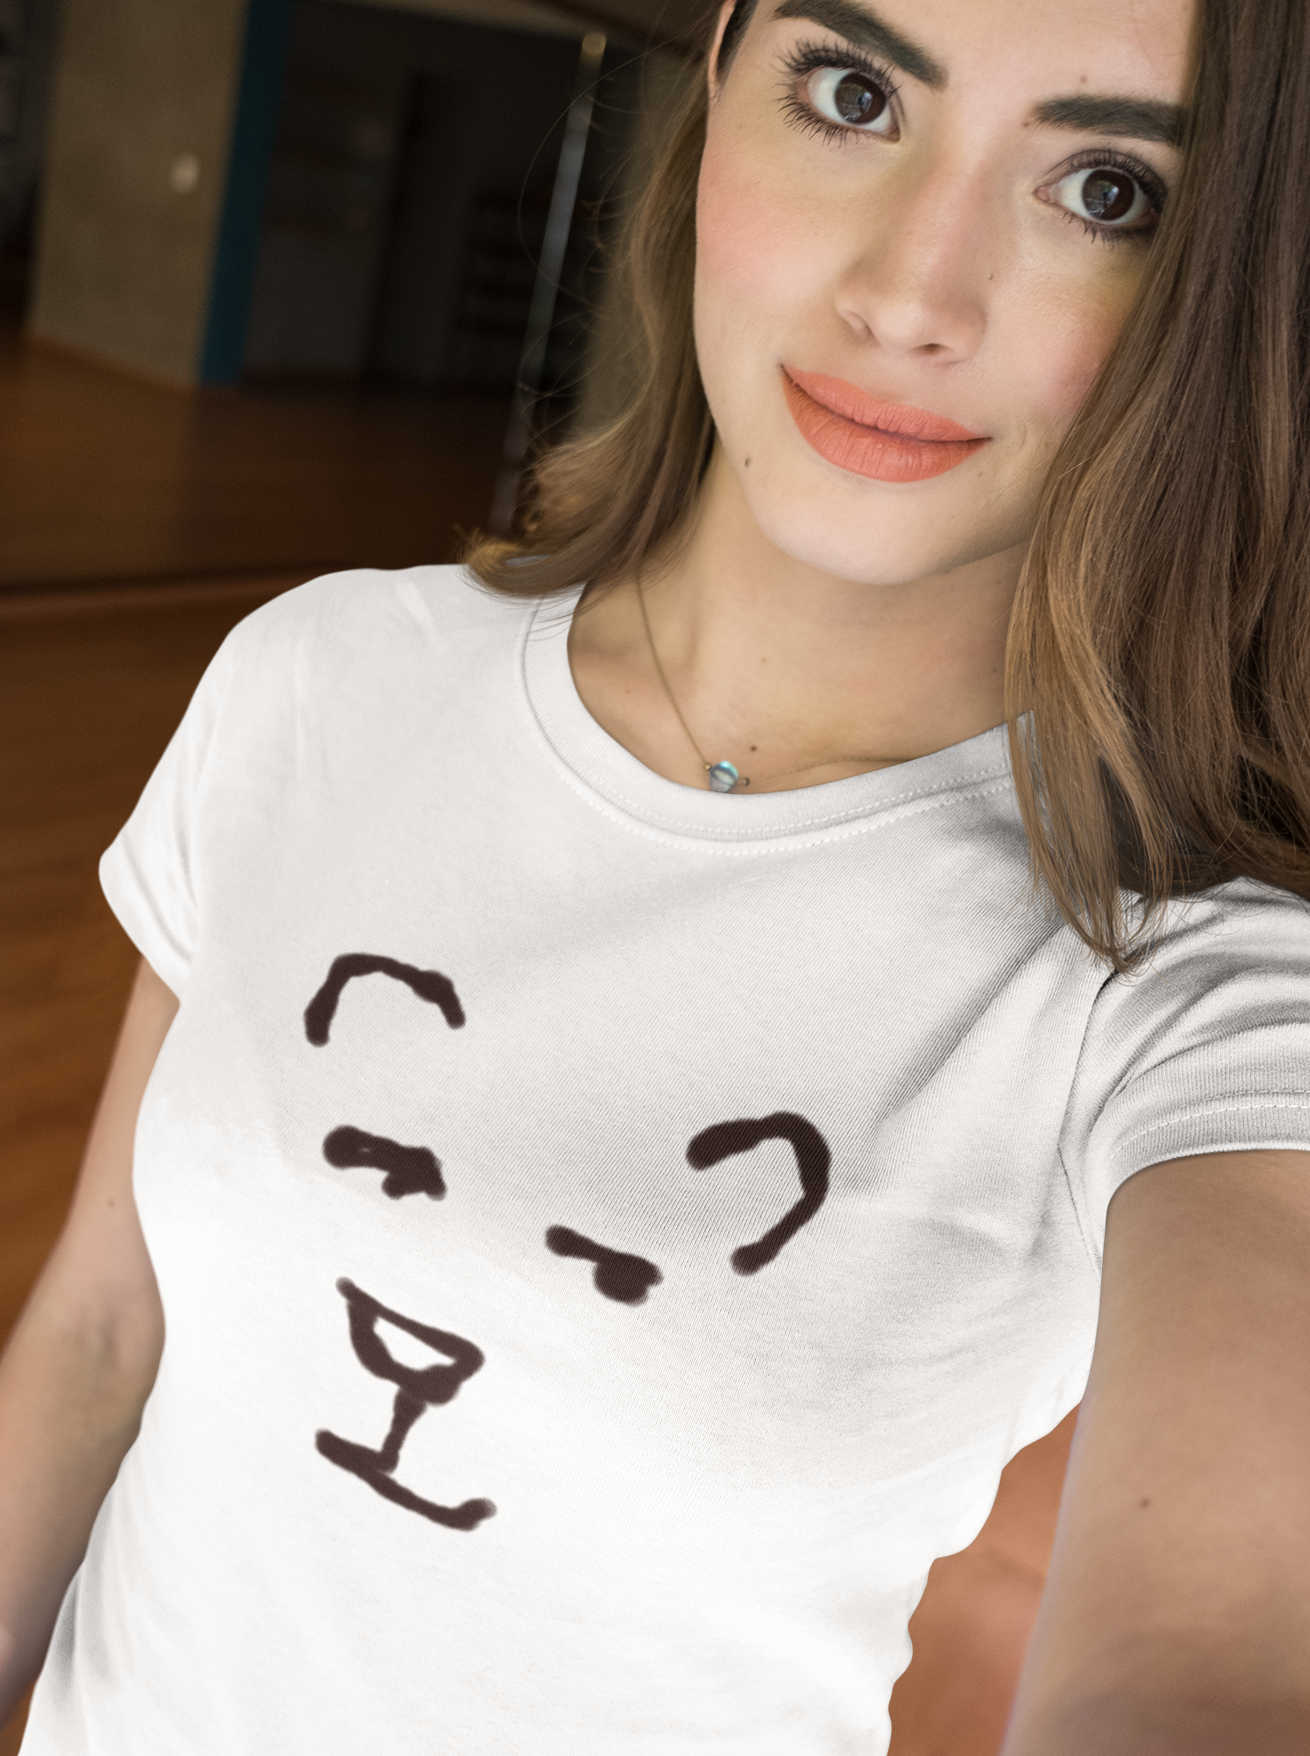 Polar Bear T-shirt - Young woman wearing an illustrated Bear vegan cotton t-shirt by Hector and Bone